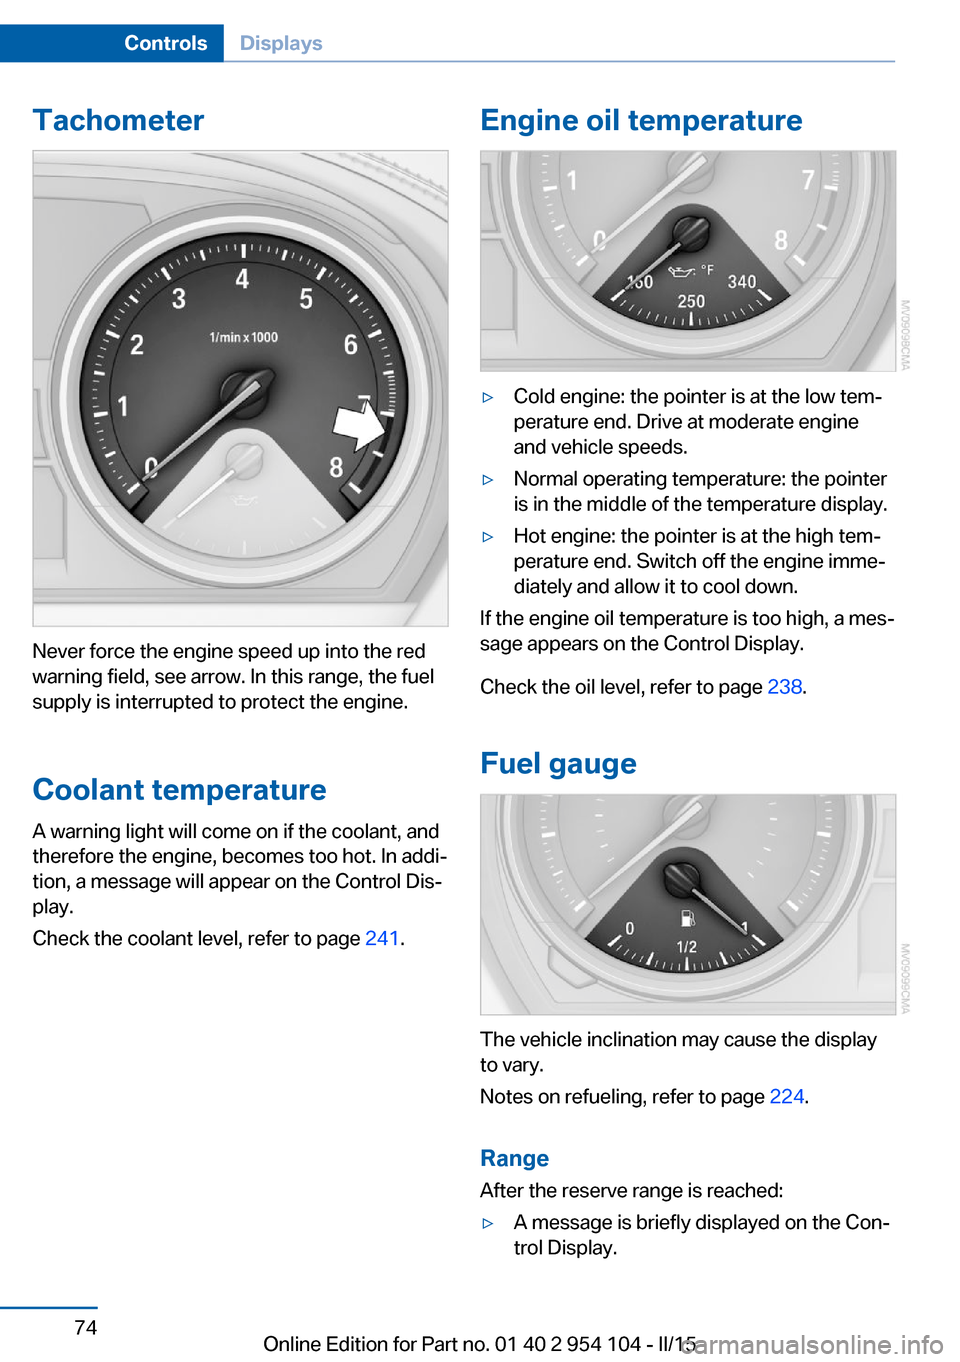 BMW Z4 2015 E89 Service Manual Tachometer
Never force the engine speed up into the red
warning field, see arrow. In this range, the fuel
supply is interrupted to protect the engine.
Coolant temperature A warning light will come on 